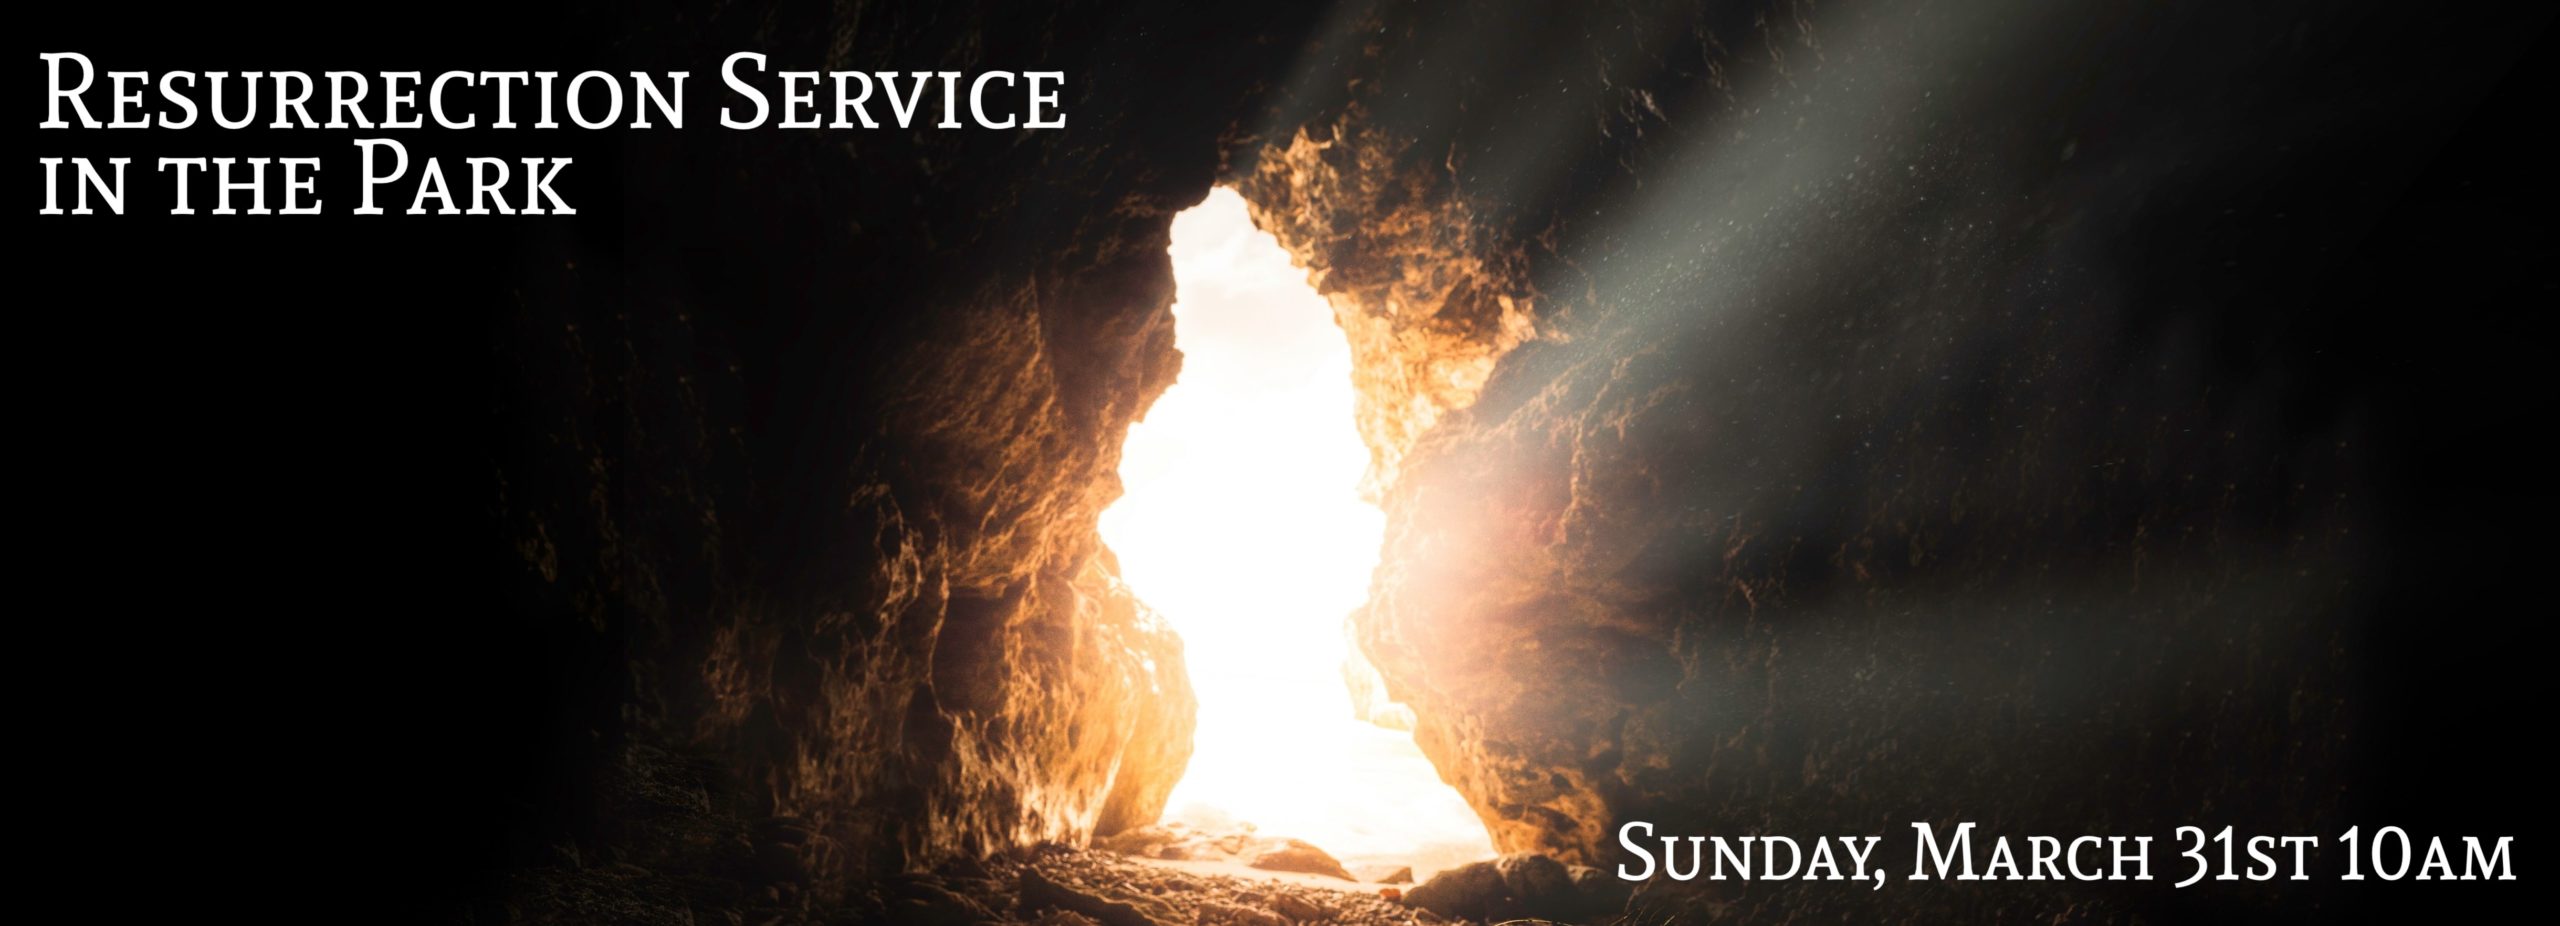 Easter Resurrection Service in the Park! Join us on Sunday March 31st at 10am